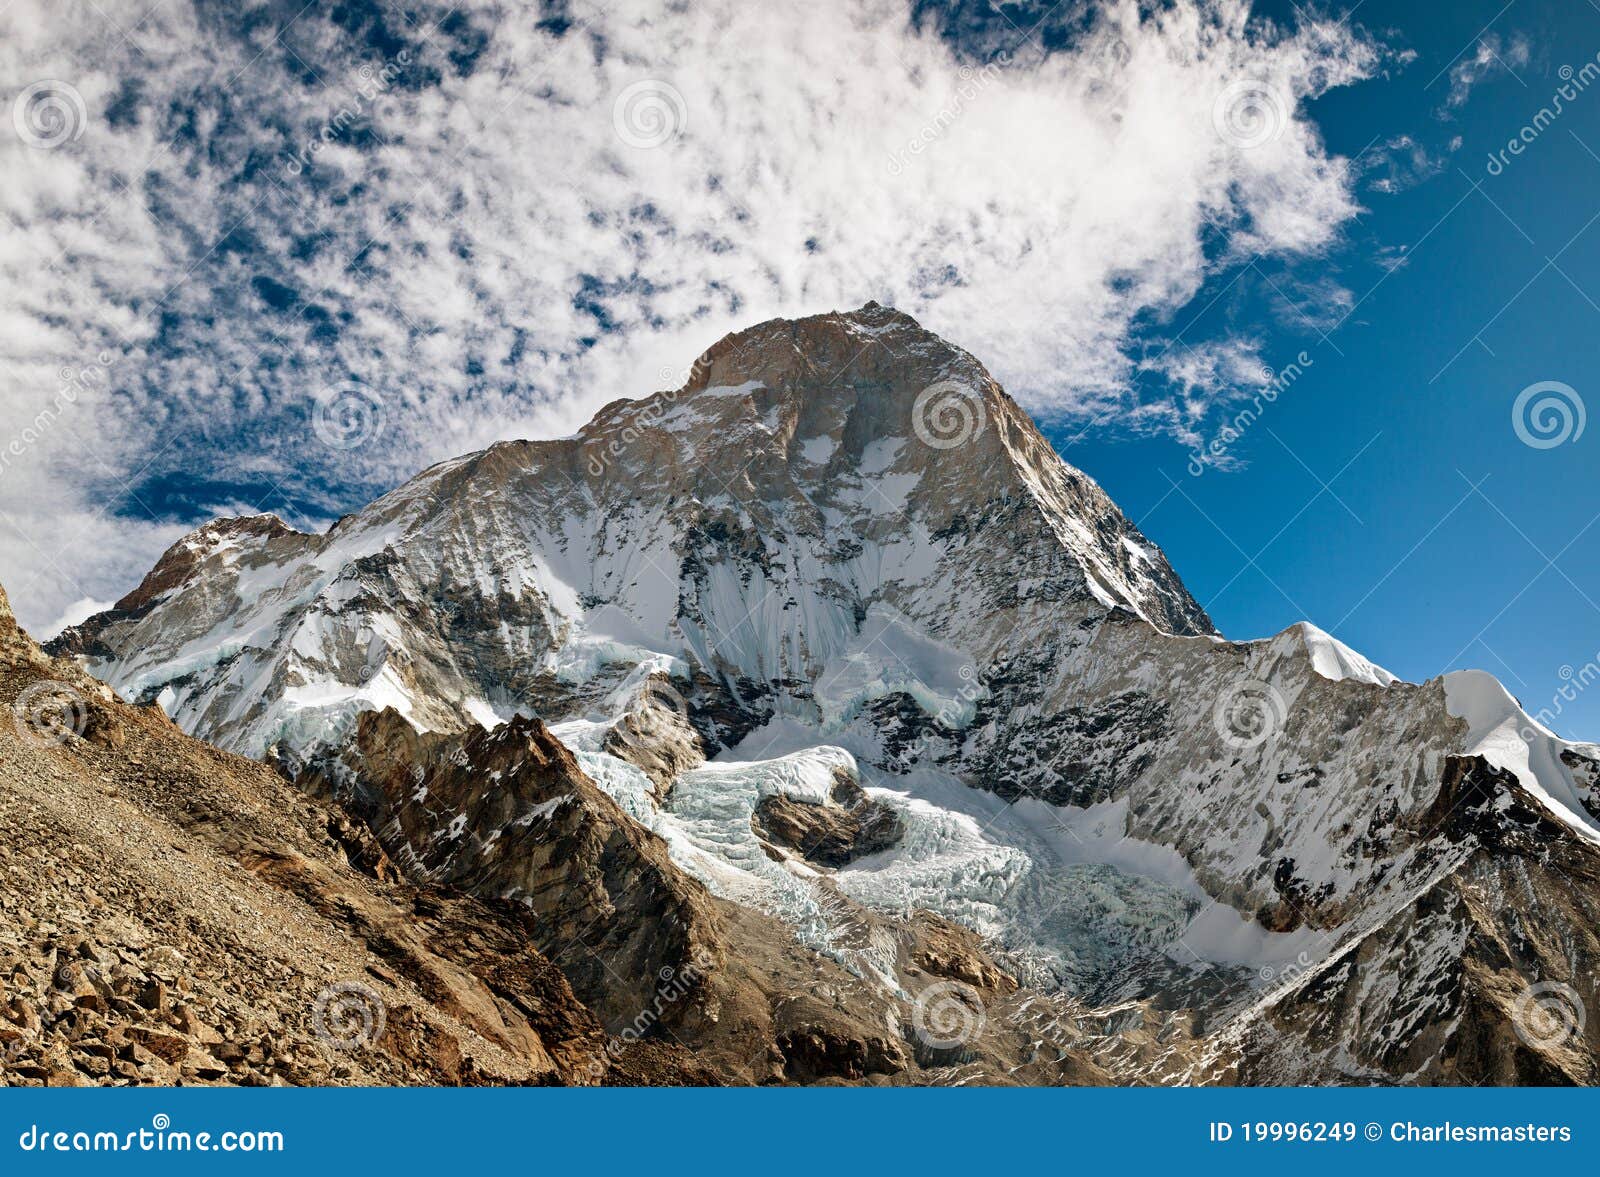 makalu the fith highest mountain in the world